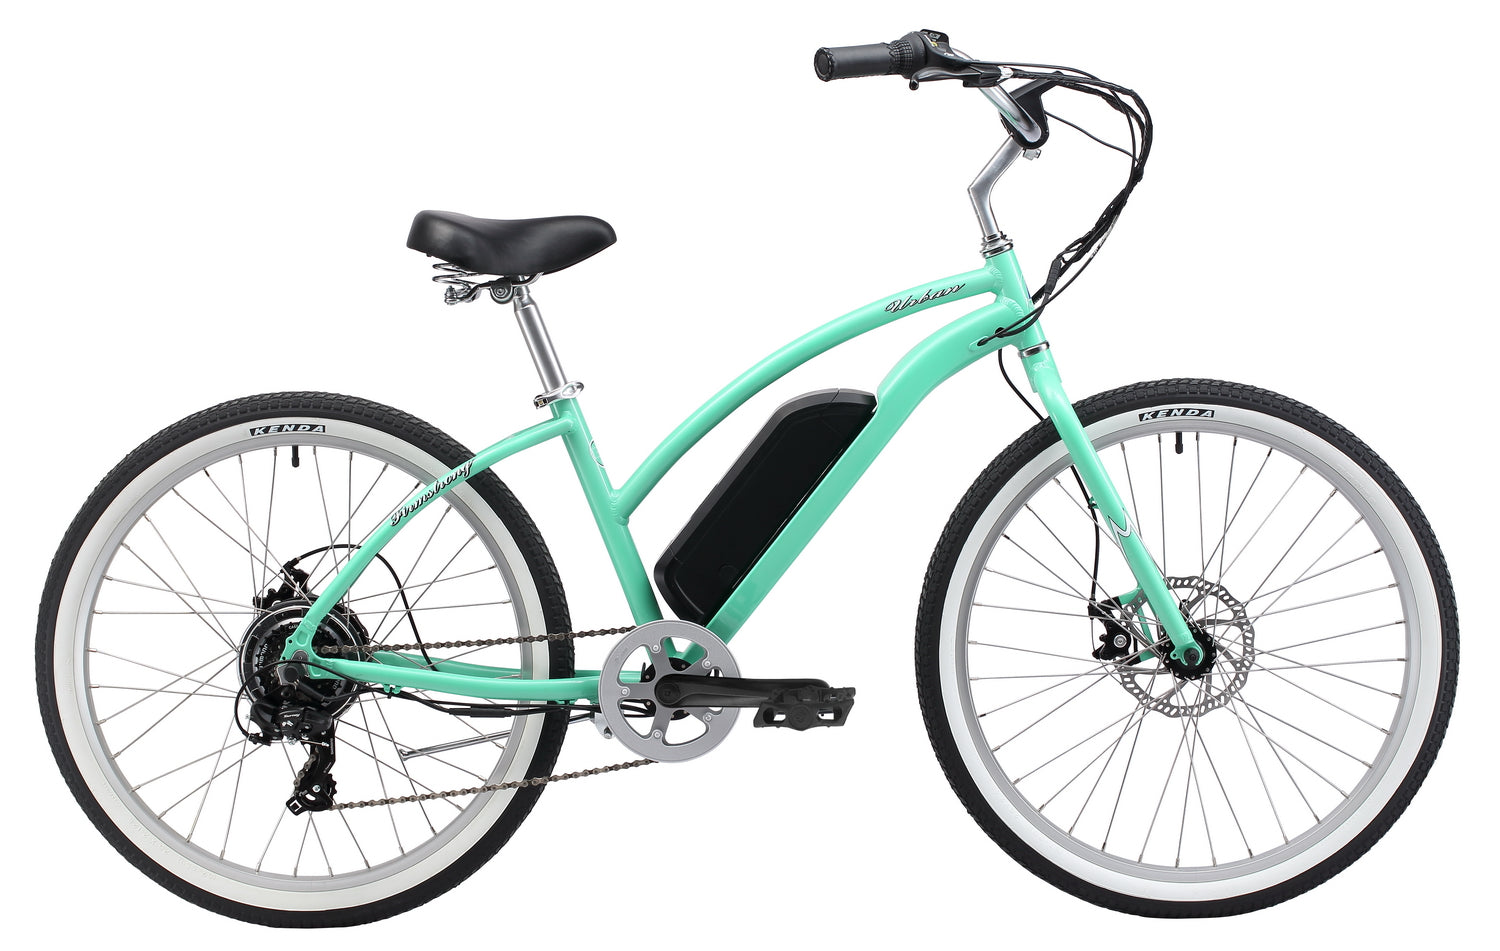 Firmstrong E-Urban Lady 350W 7 Speed Alloy Beach Cruiser Electric Bicycle